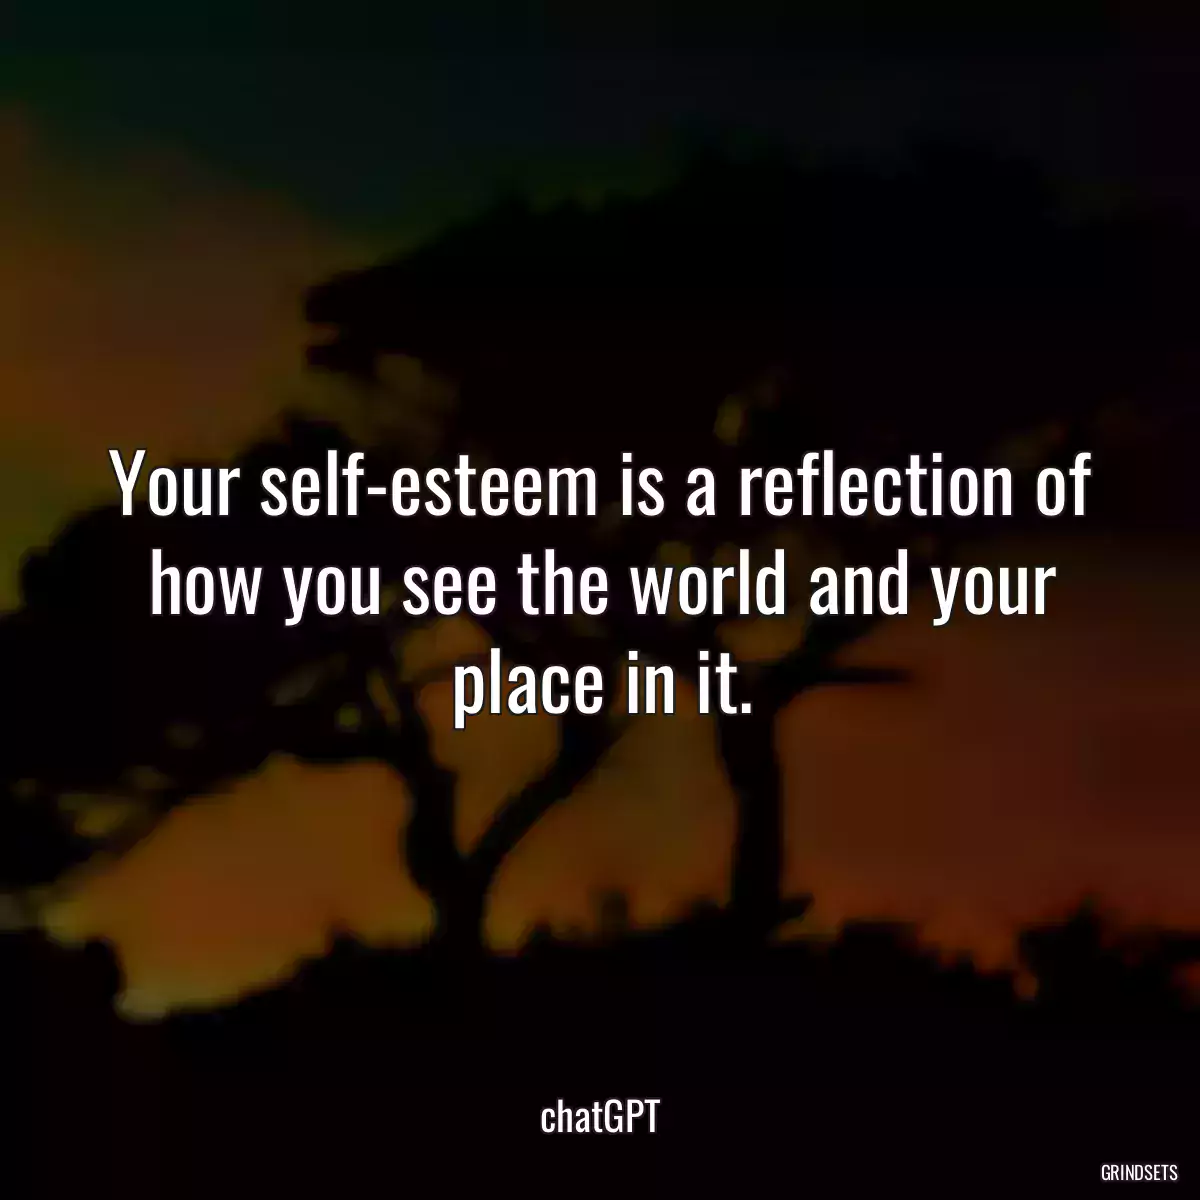 Your self-esteem is a reflection of how you see the world and your place in it.